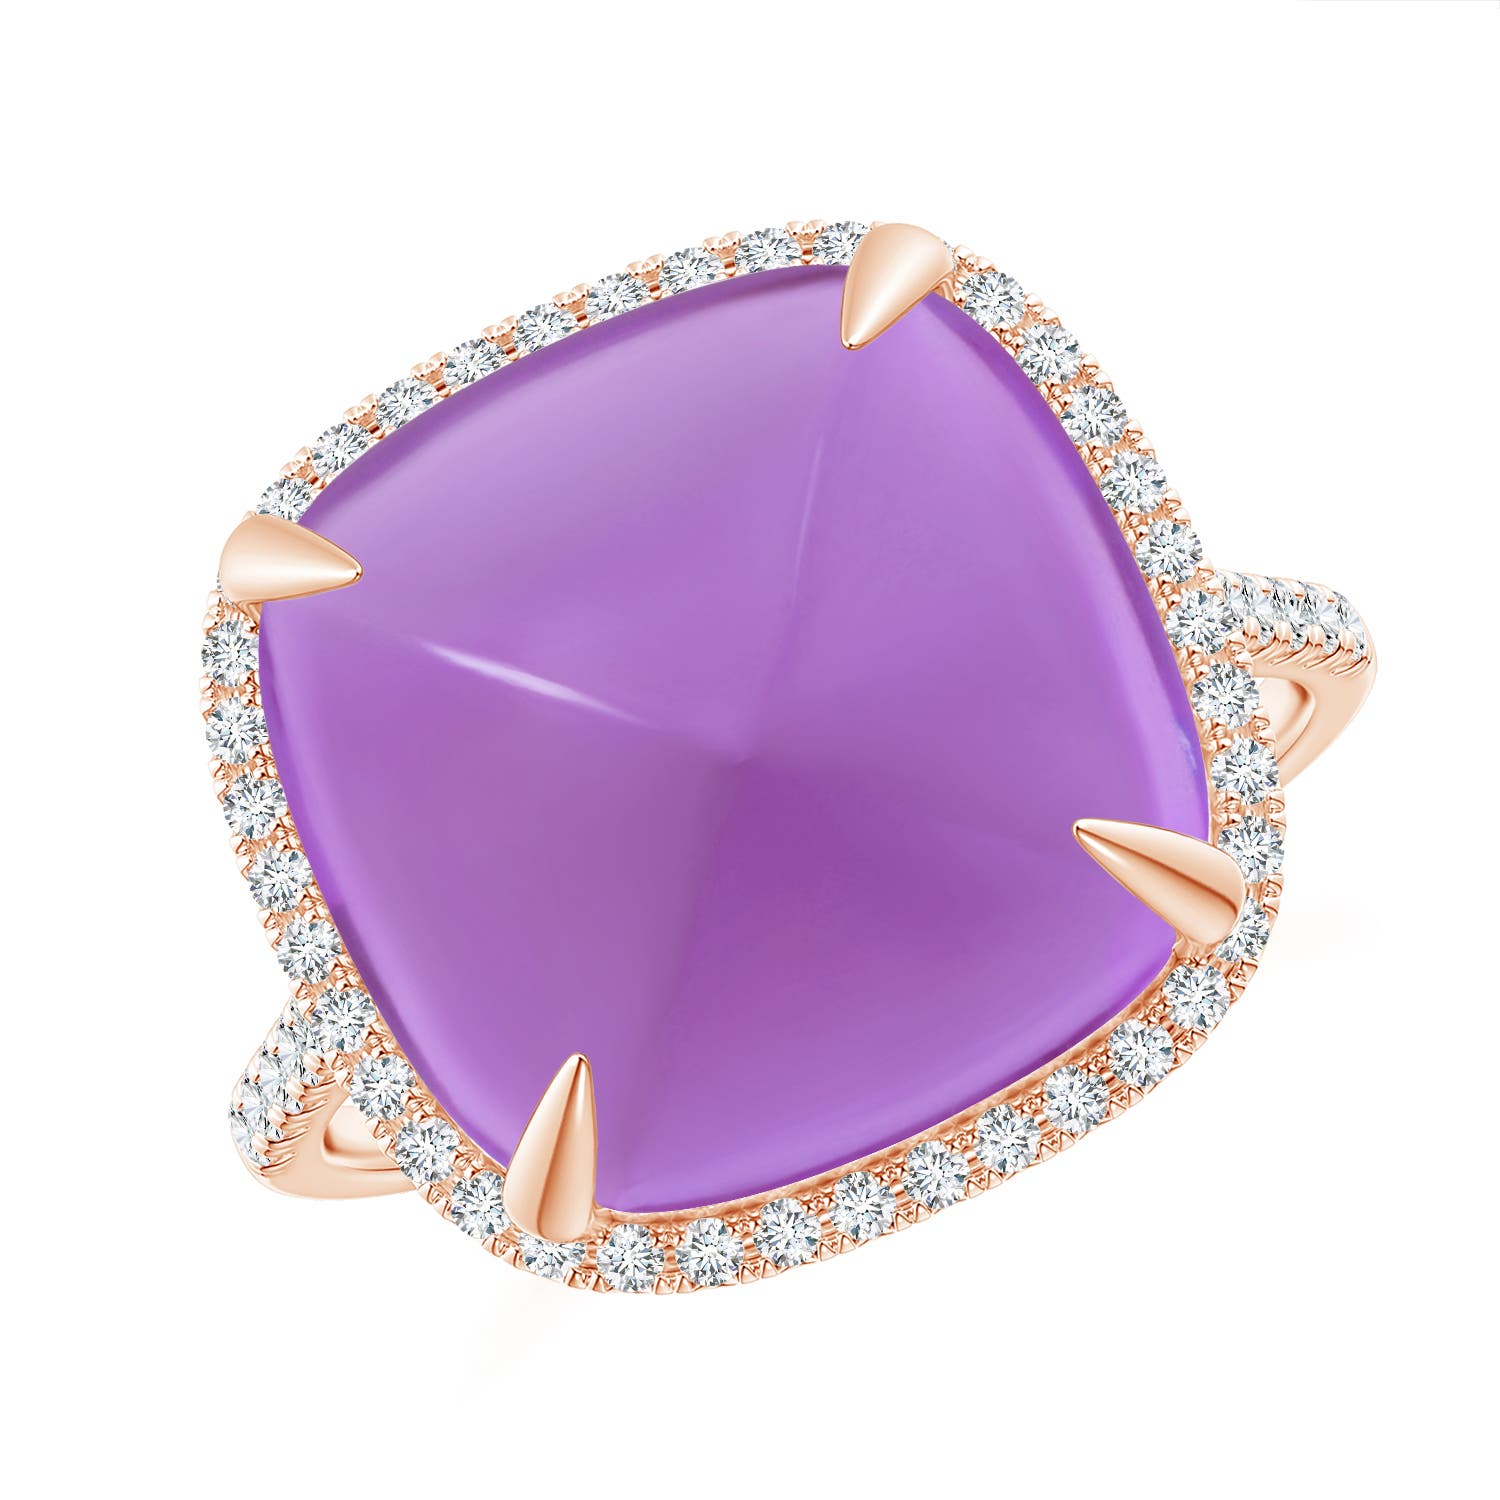 AA - Amethyst / 10.34 CT / 14 KT Rose Gold